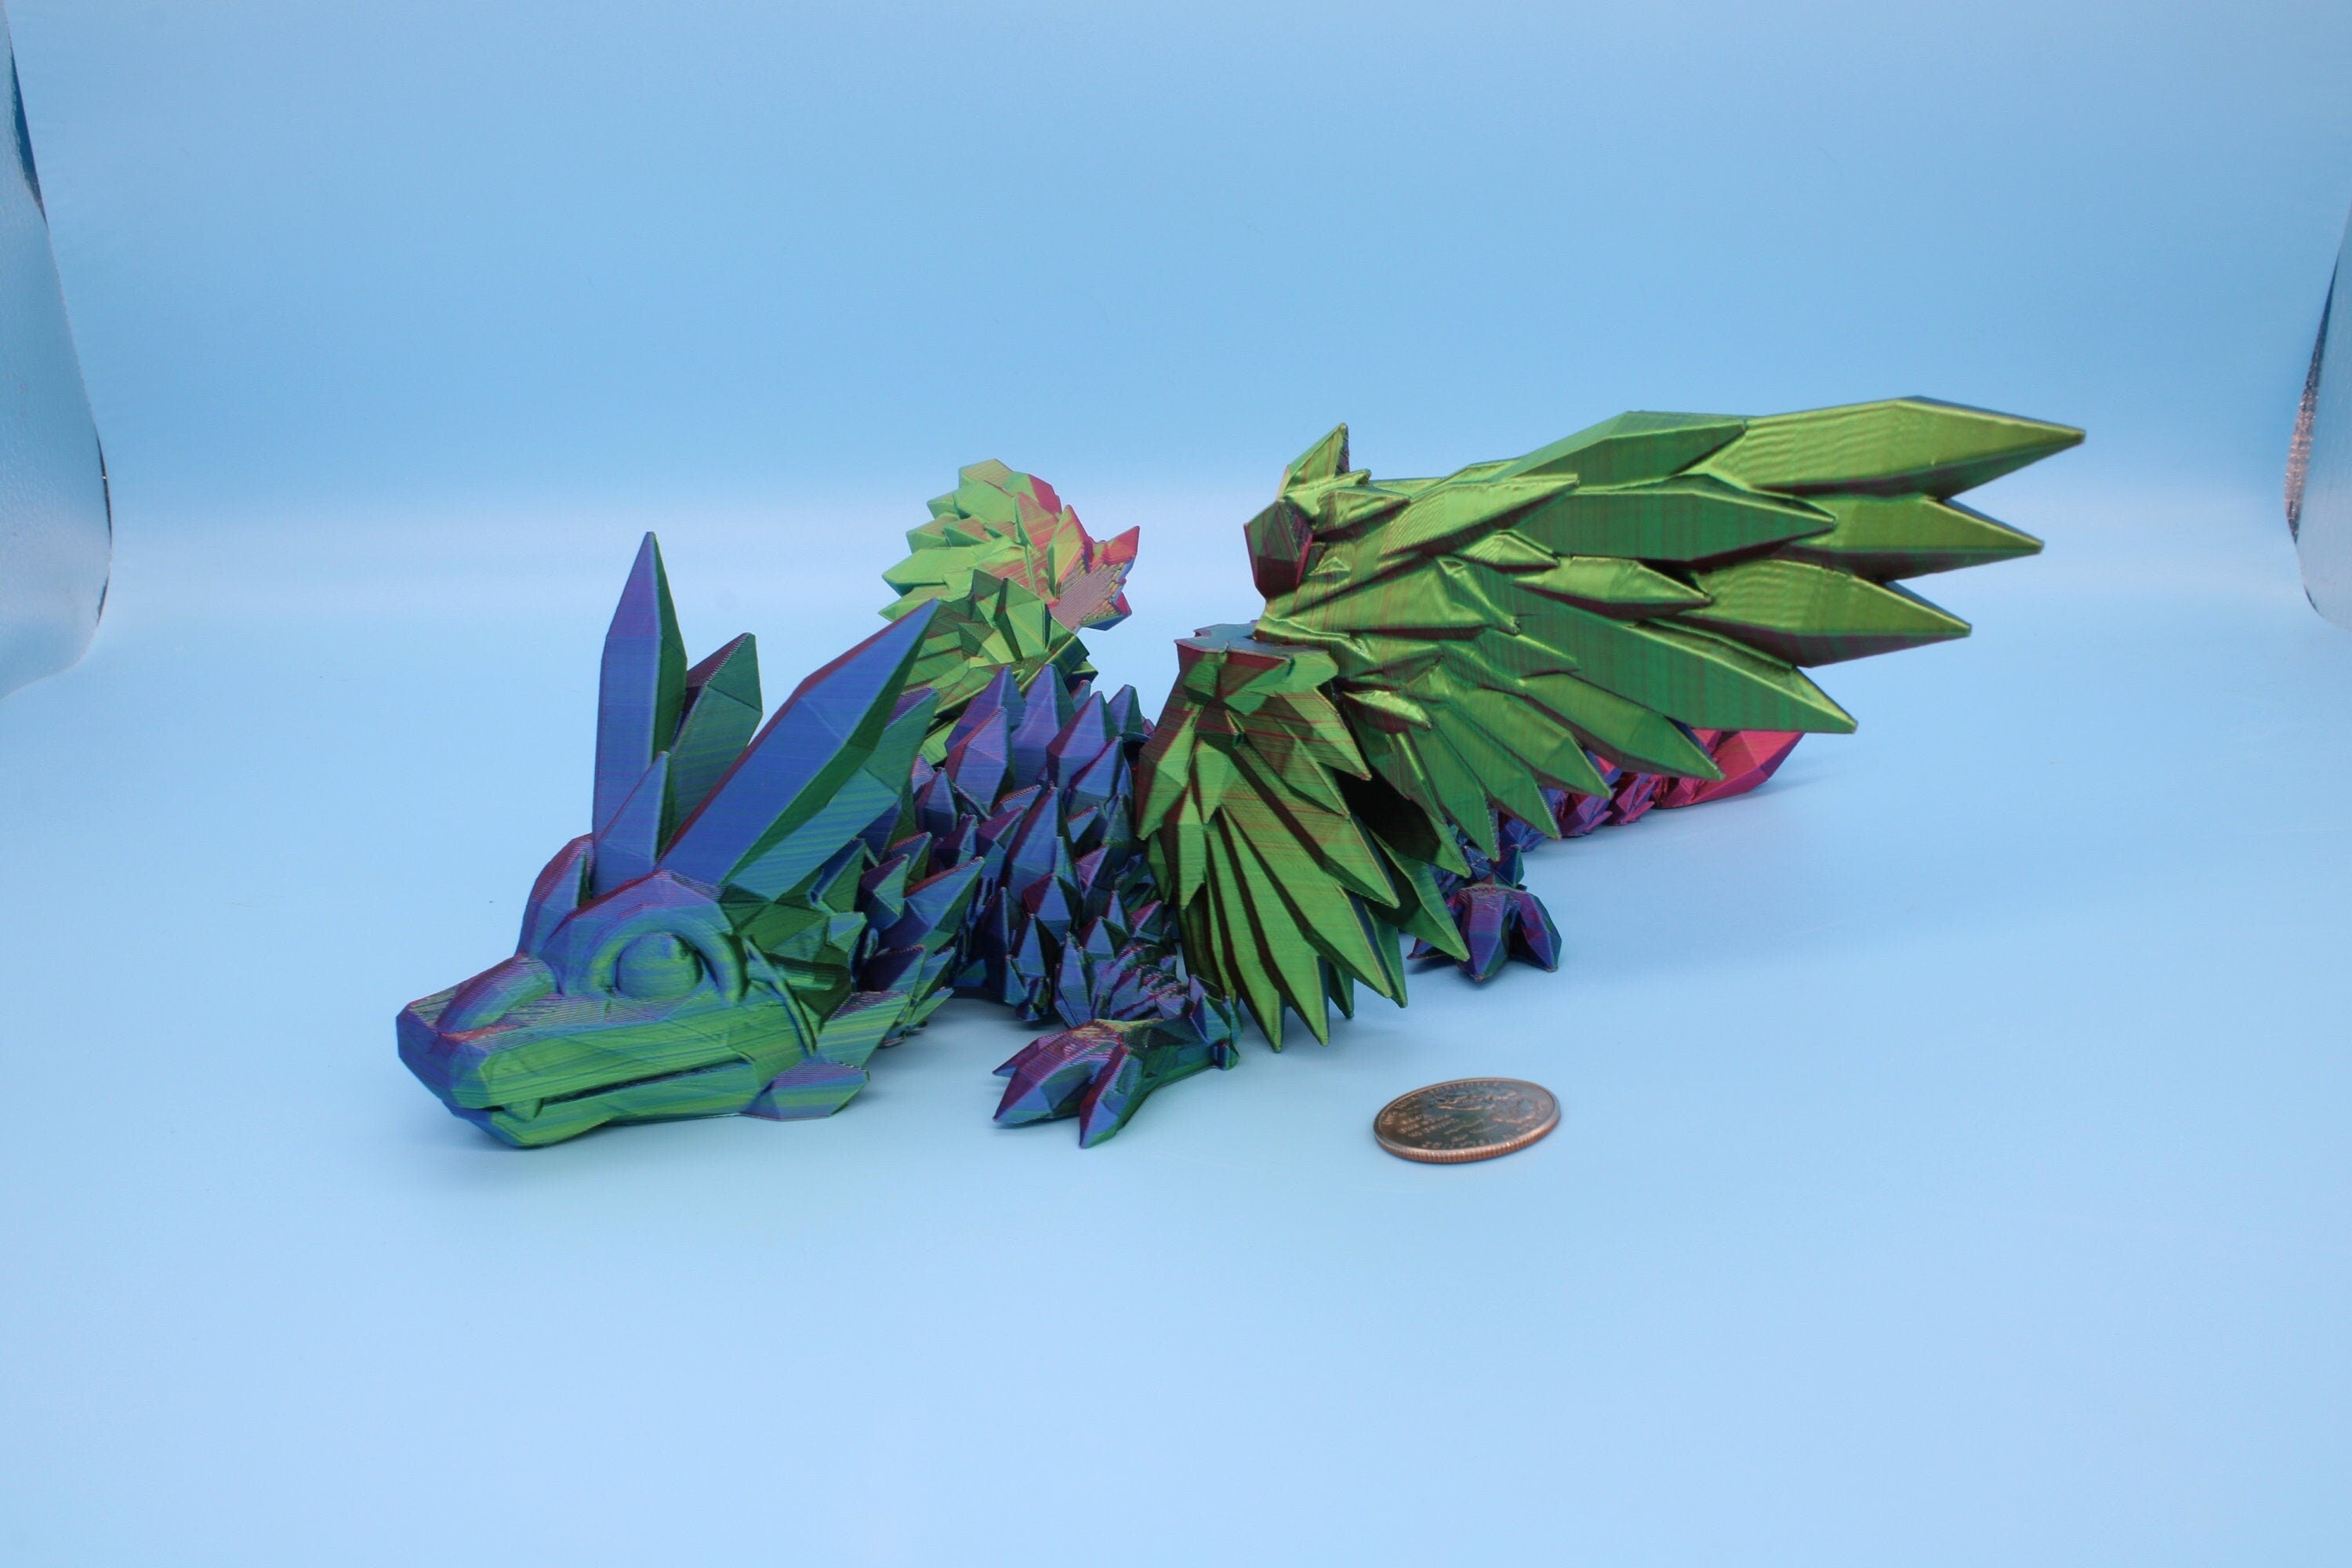 Multi Color, Rainbow Baby Crystal Winged Dragon. 3D printed articulating dragon Fidget, Flexi, Toy 11.5 in. Stress Relief, Gift.